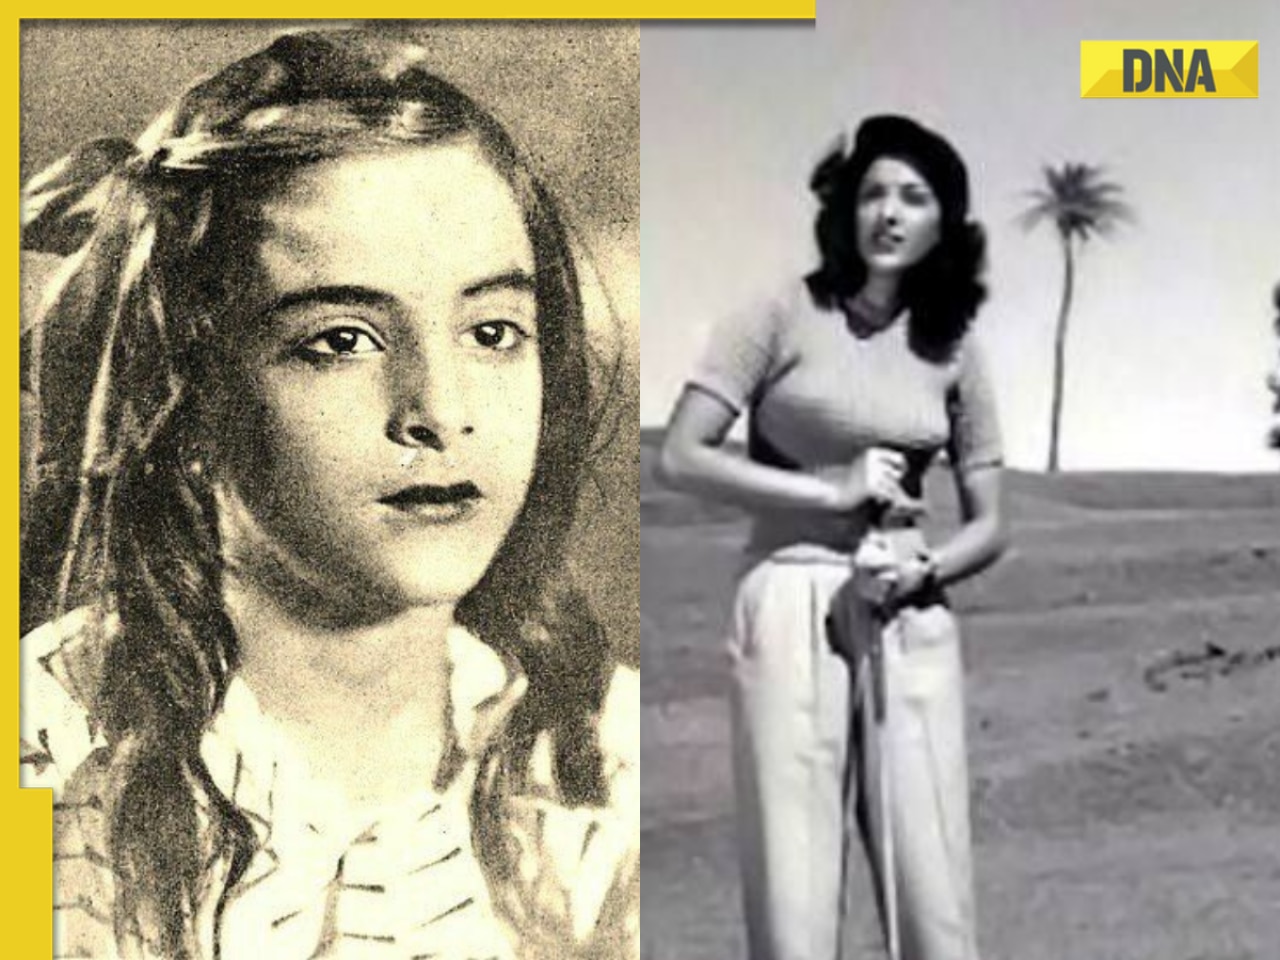 India's most successful star kid was superstar at 14, daughter of tawaif, affair with married star broke her, died at...